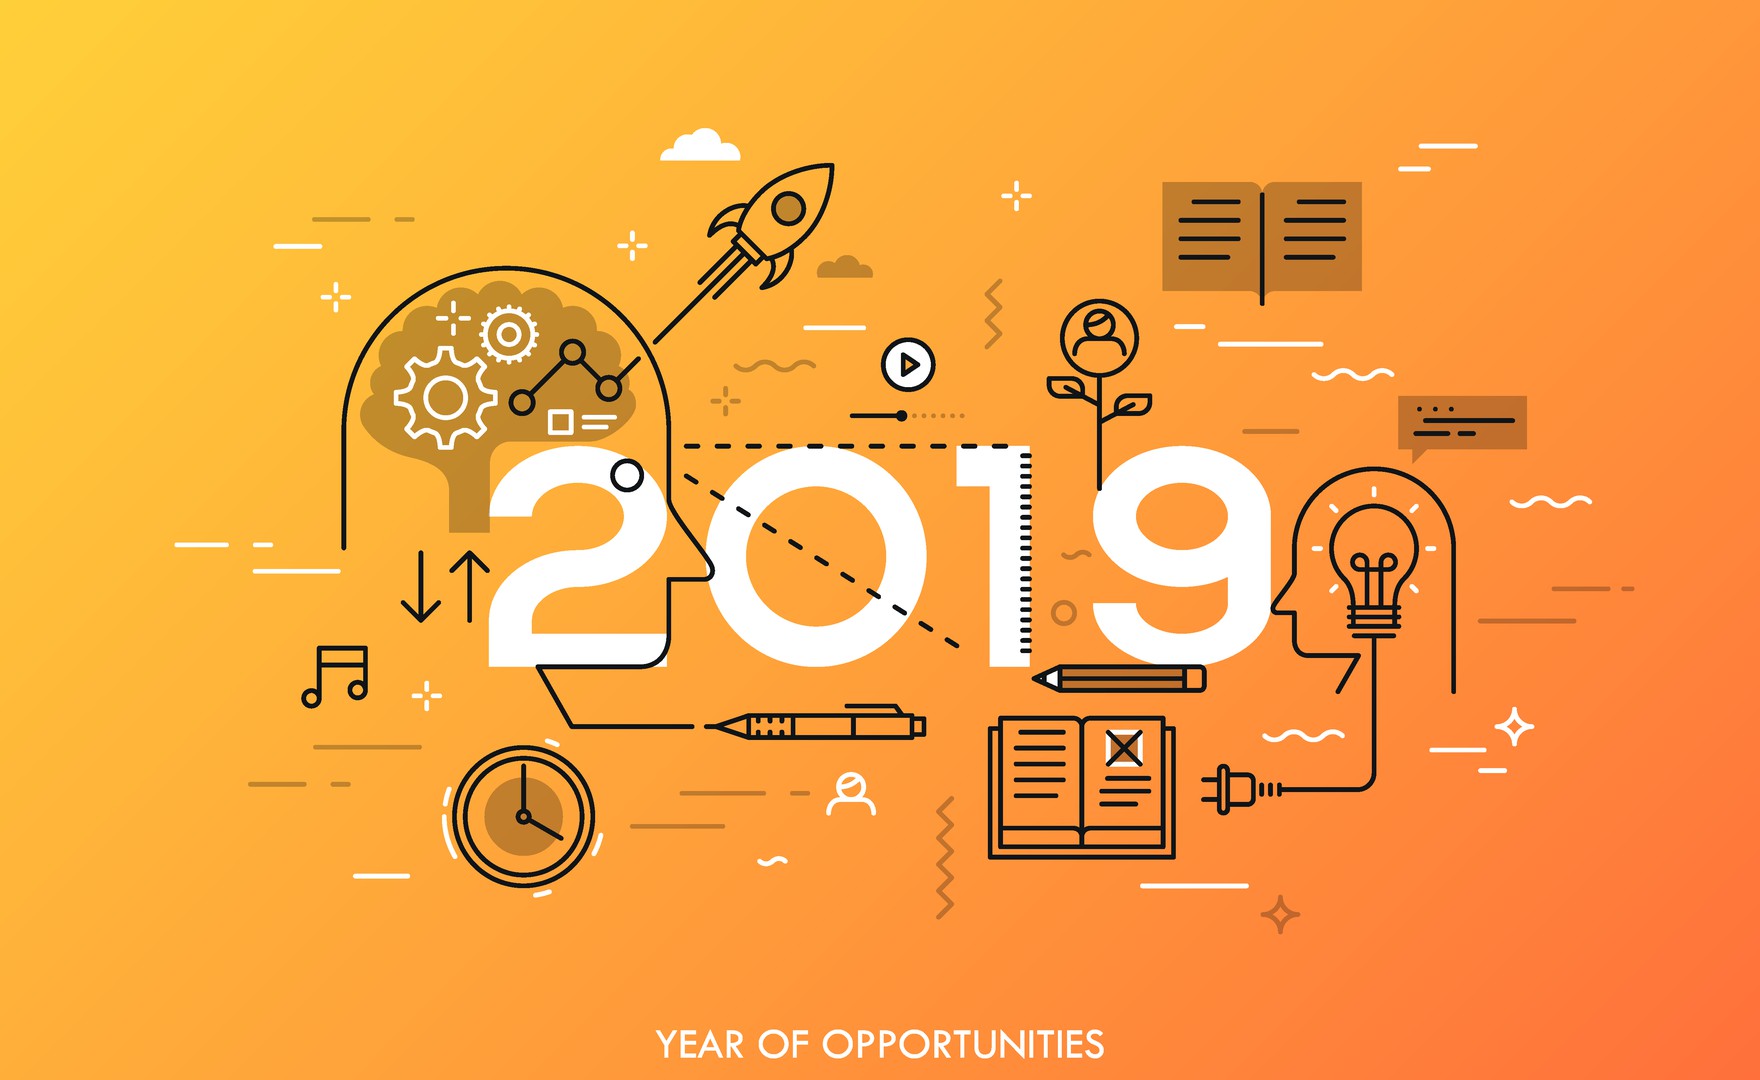 Three workplace trends to look out for in 2019